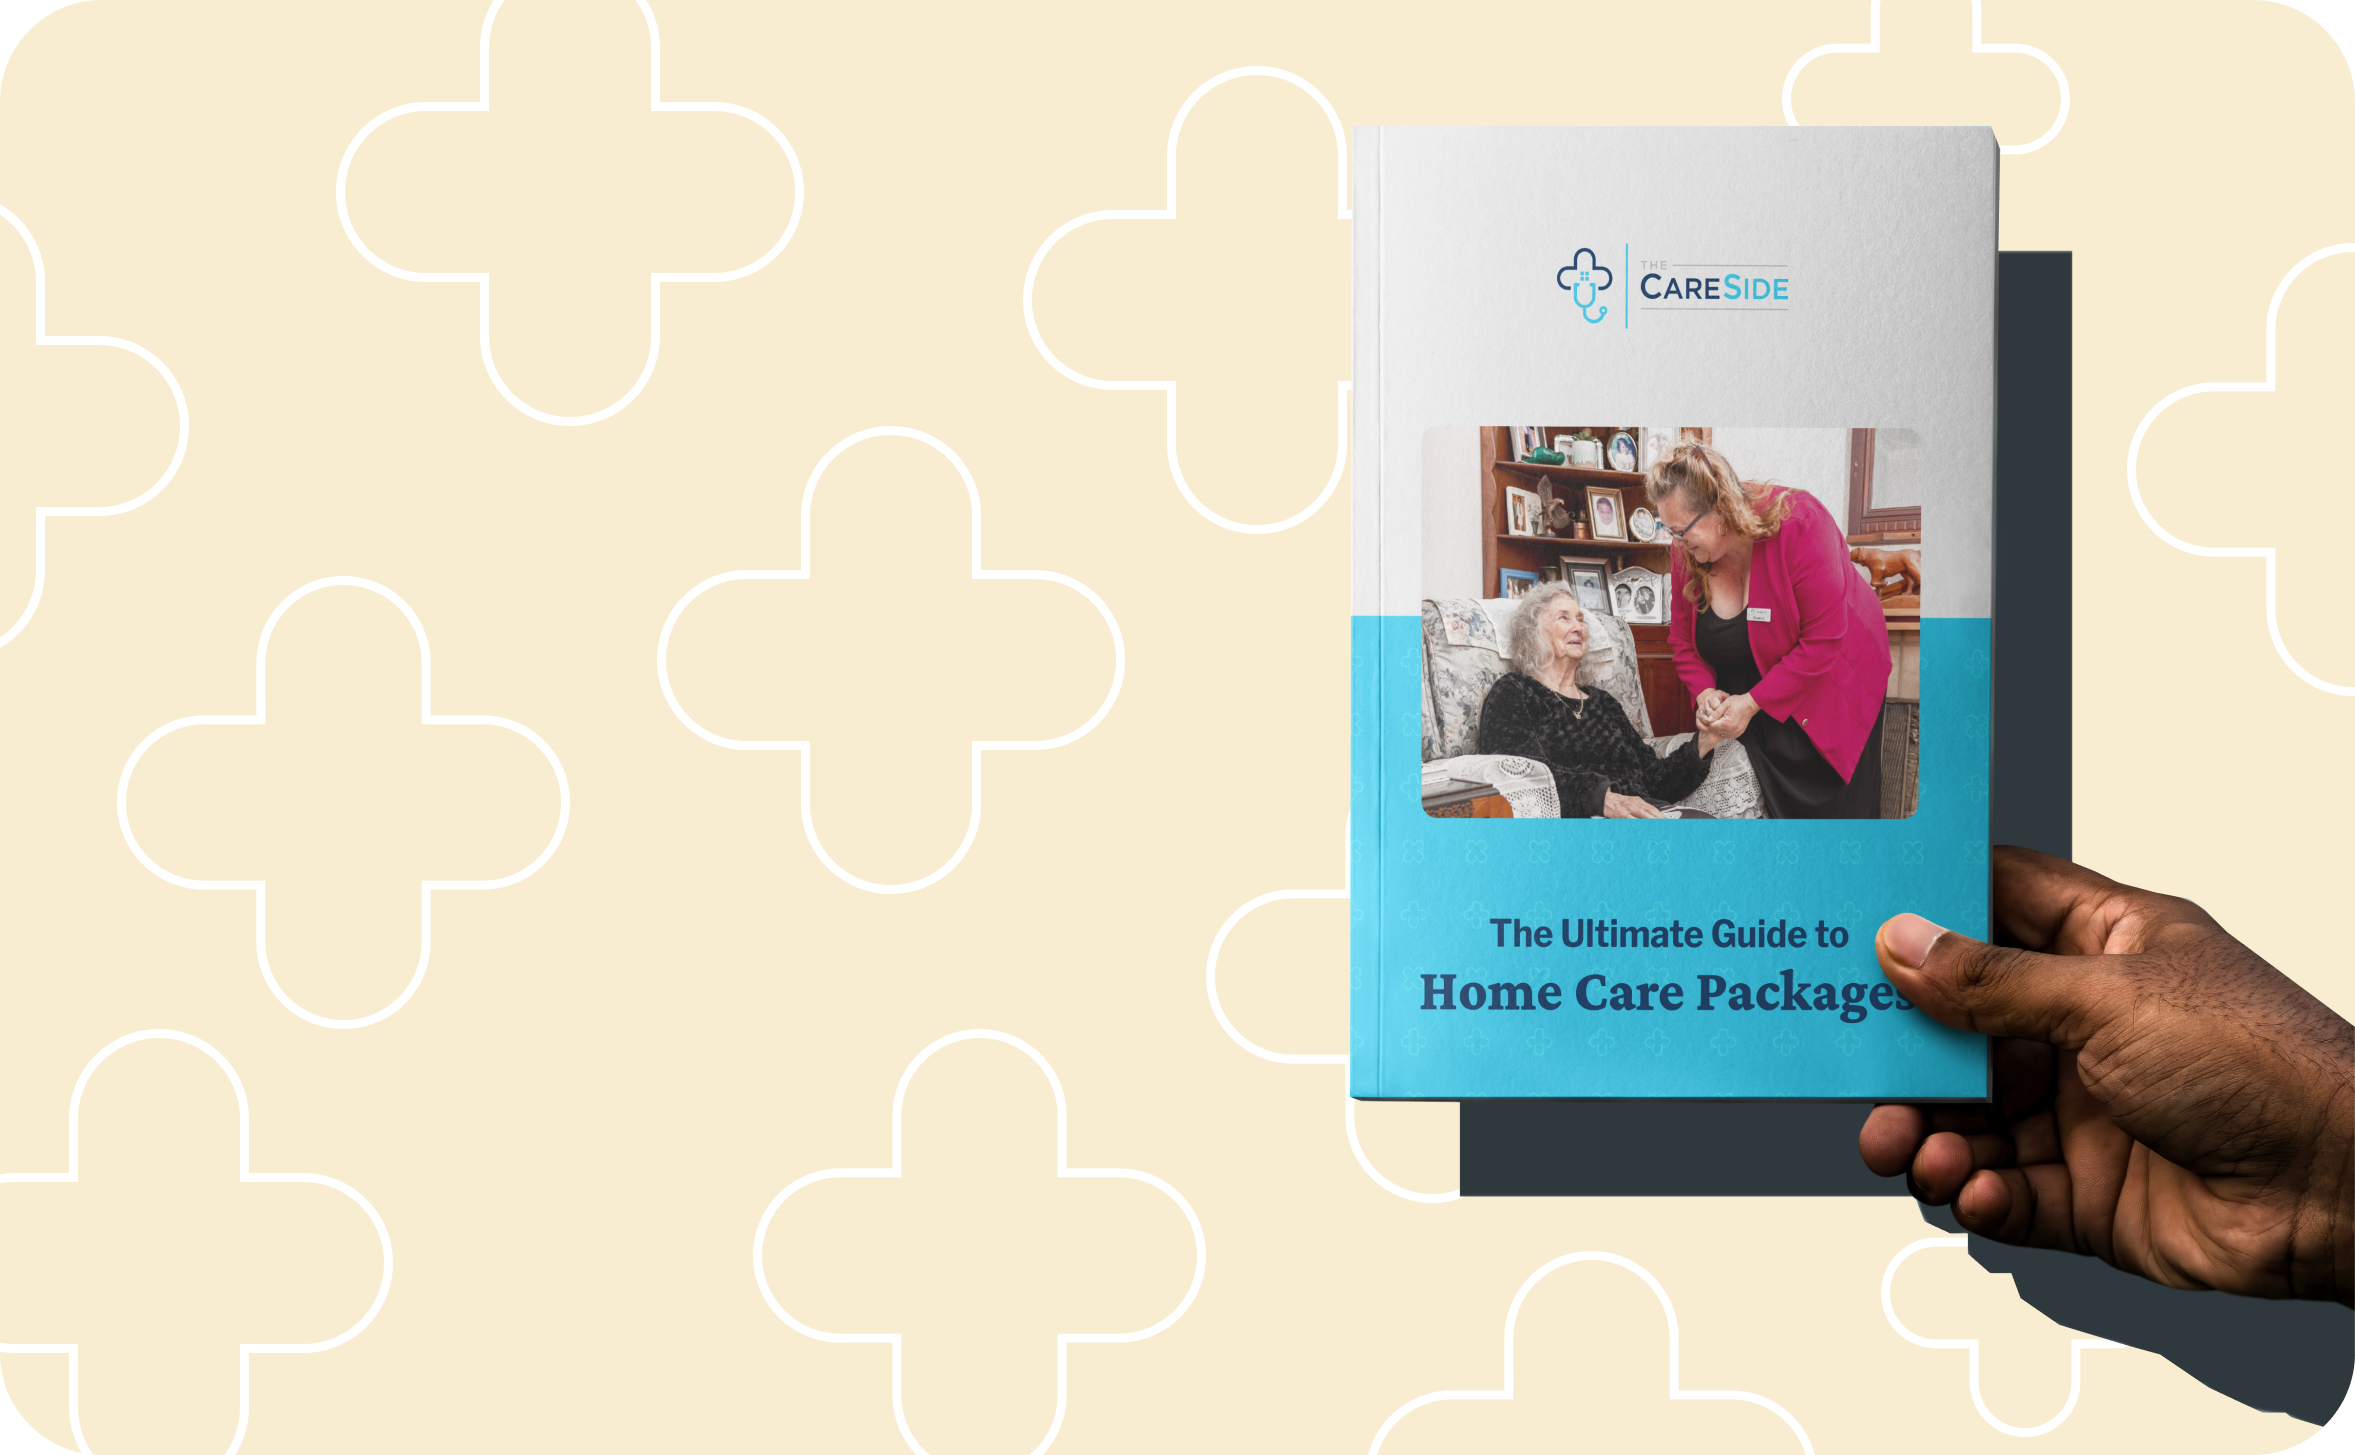 Download our free ebook for additional home care package guidelines